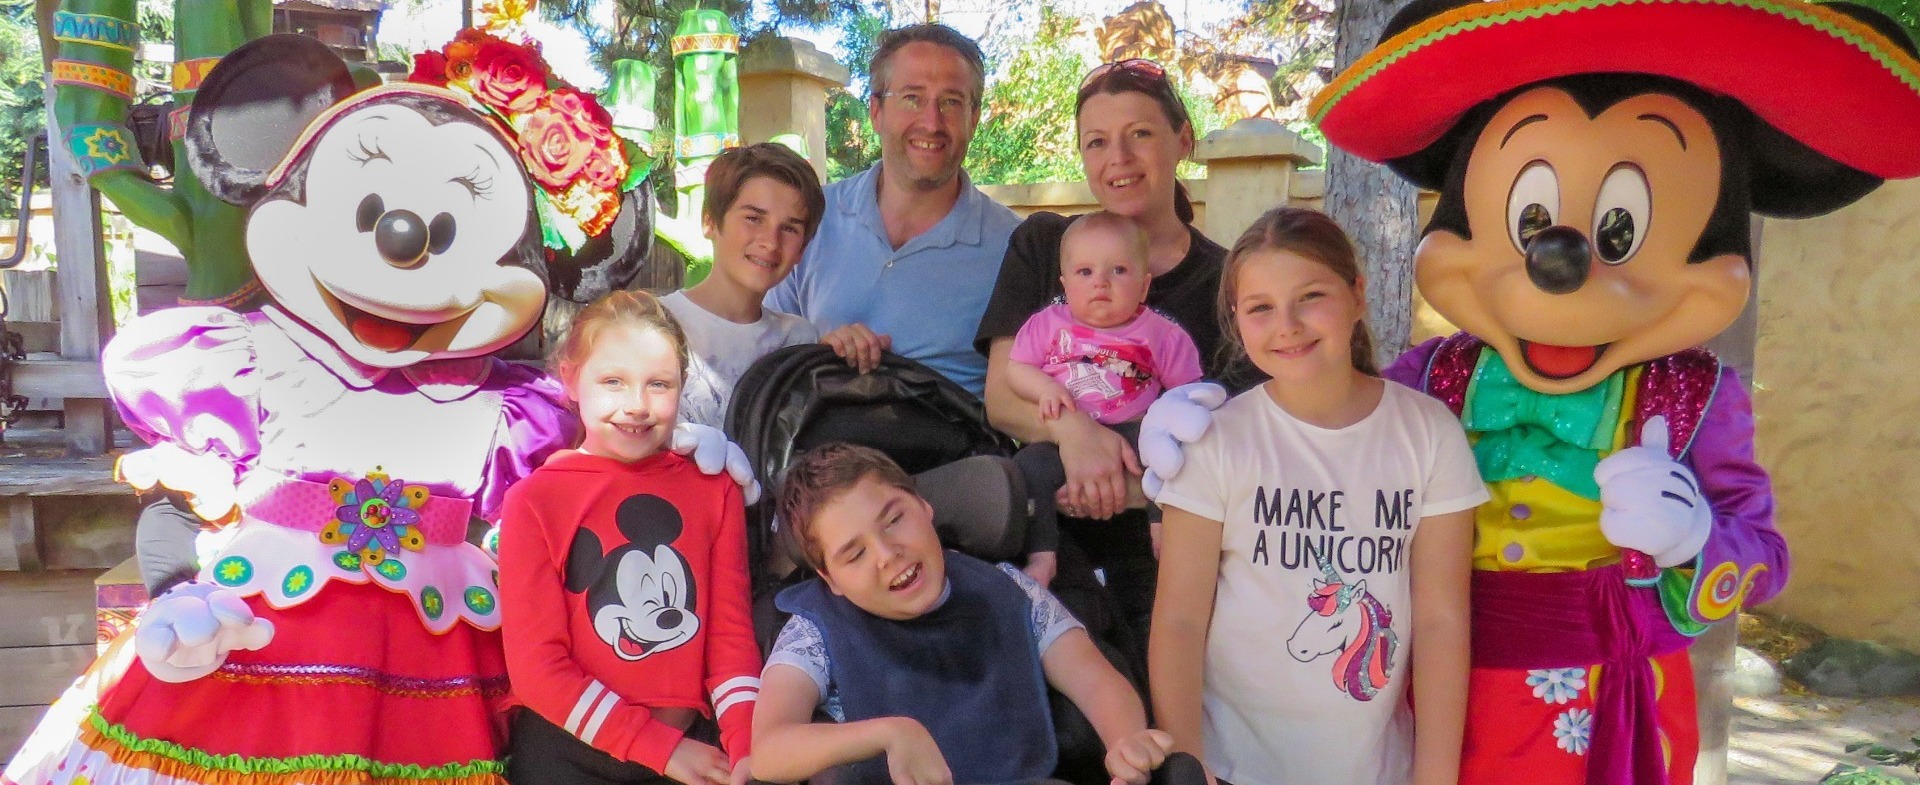 Peter and Karen Merry enjoying a family holiday with their five children.